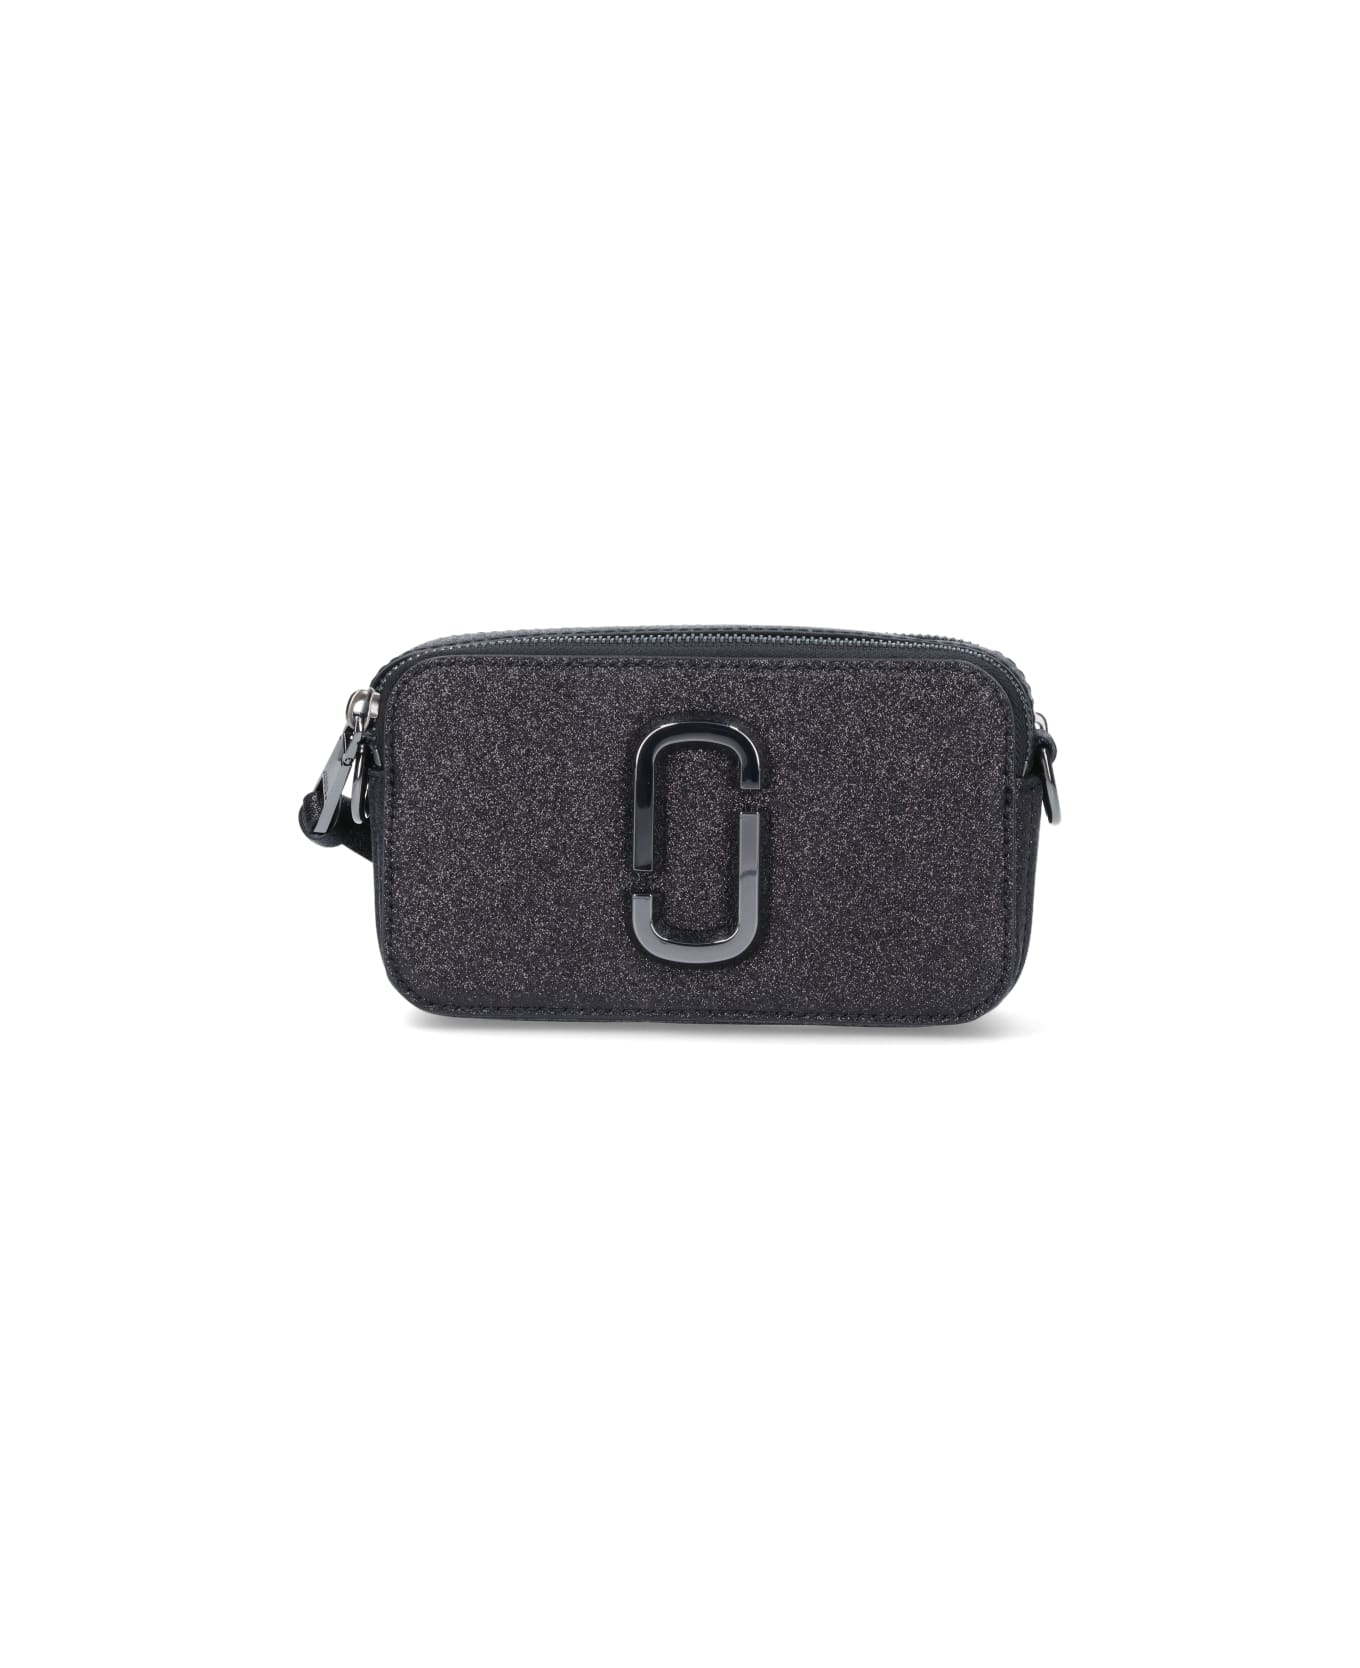 Marc Jacobs The Snapshot Leather Camera Bag - black ショルダーバッグ